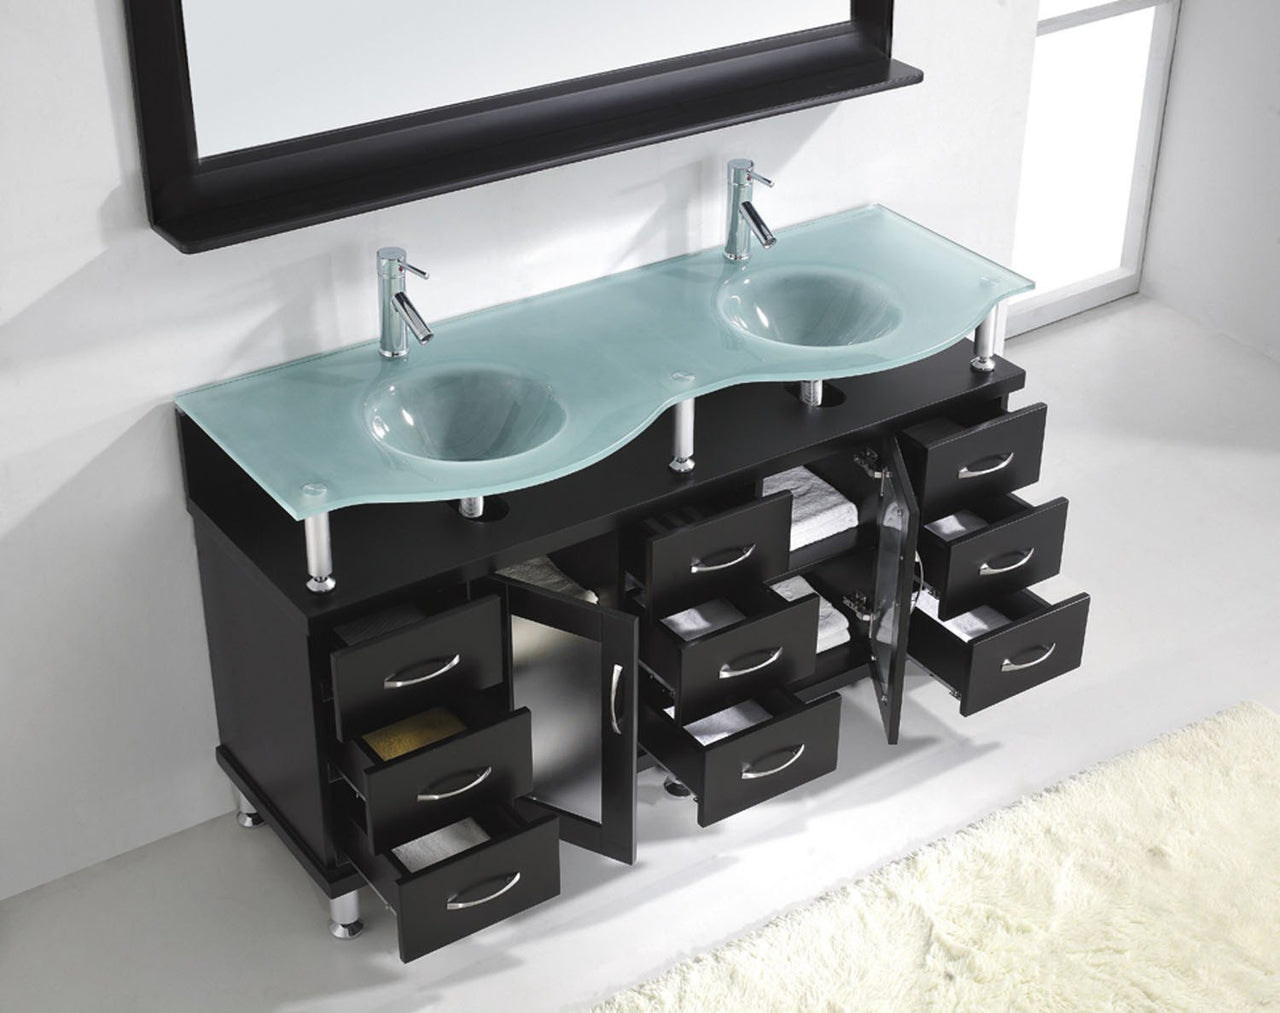 Virtu USA Vincente Rocco 59" Double Round Sink Espresso Top Vanity in Espresso with Polished Chrome Faucet and Mirror Vanity Virtu USA 